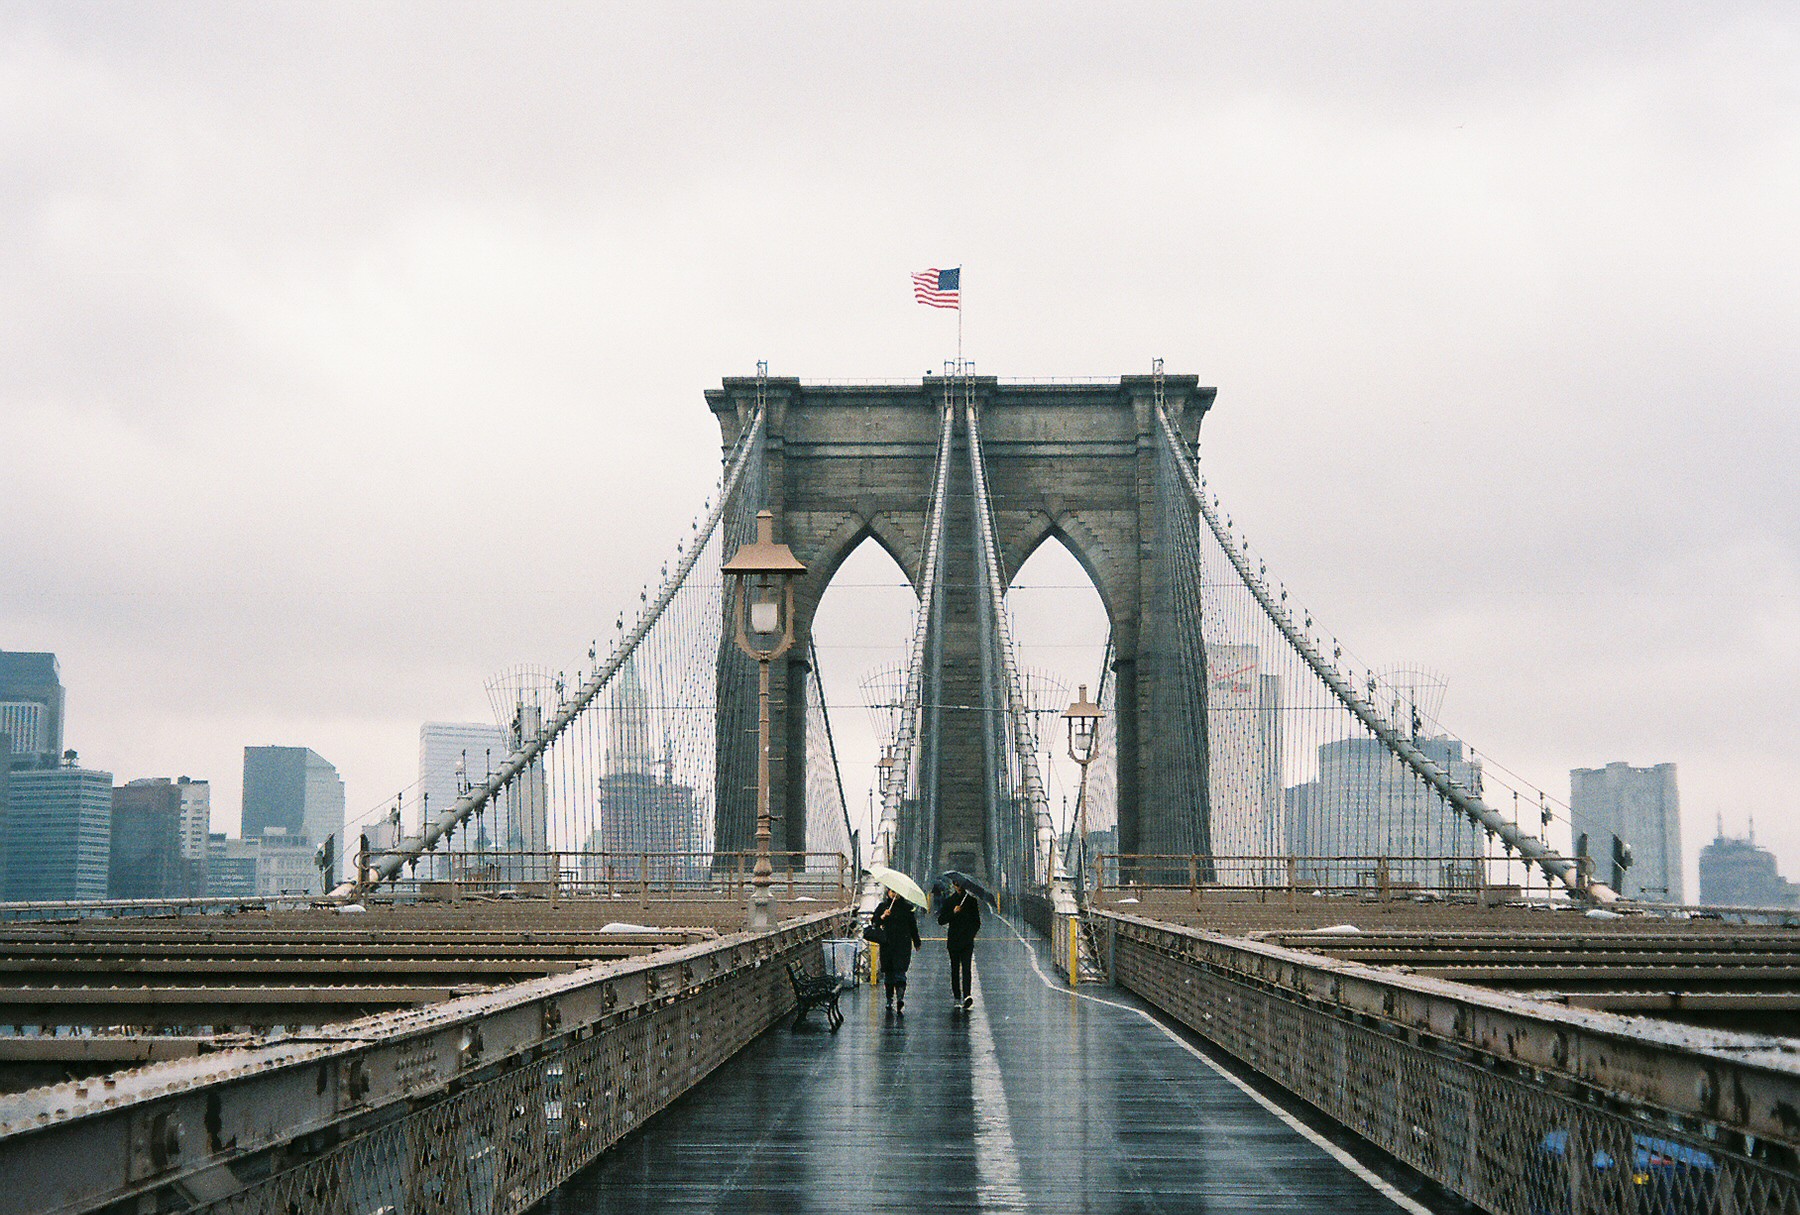 A photo of two people walking on the Brooklyn Bridge in New York City on a rainy day, with an American flag waving in the wind at the top.